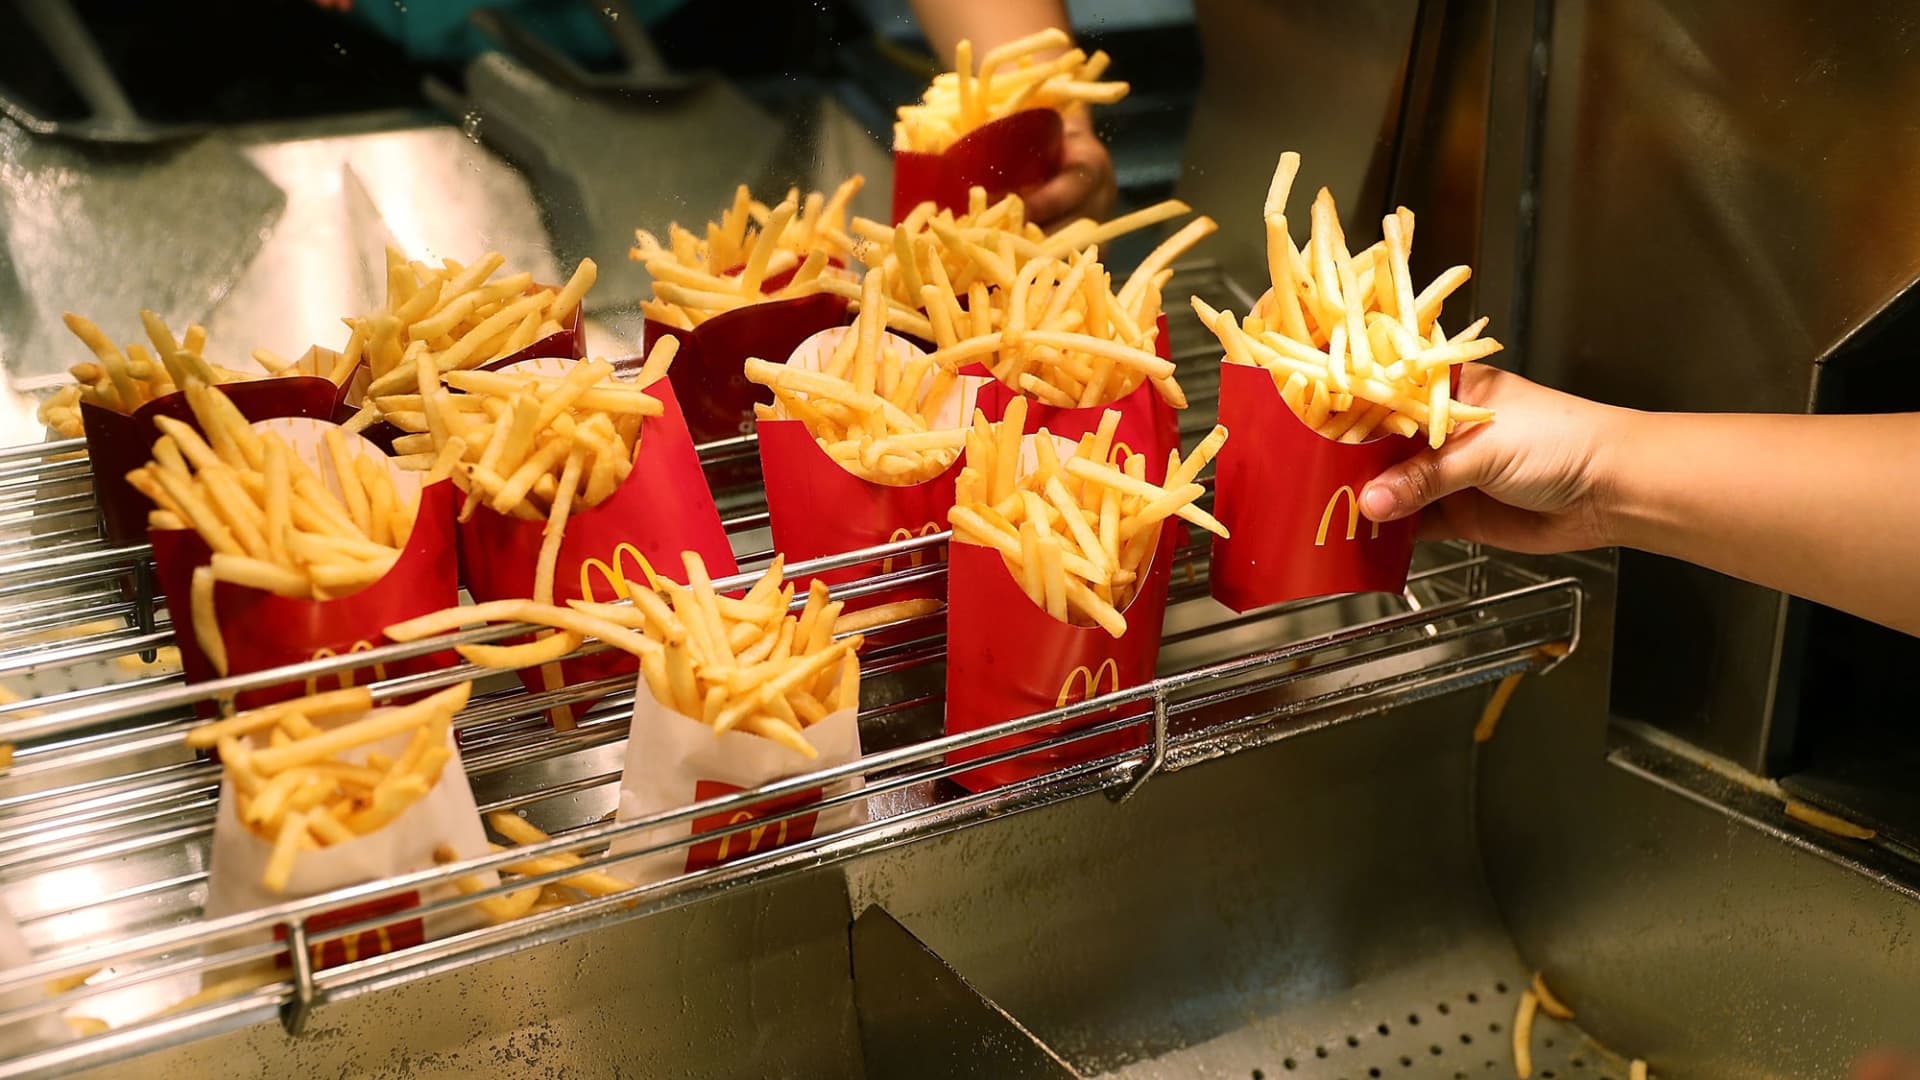 Demand for french fries reflects resilient consumer as so-called fry attachment rate holds steady